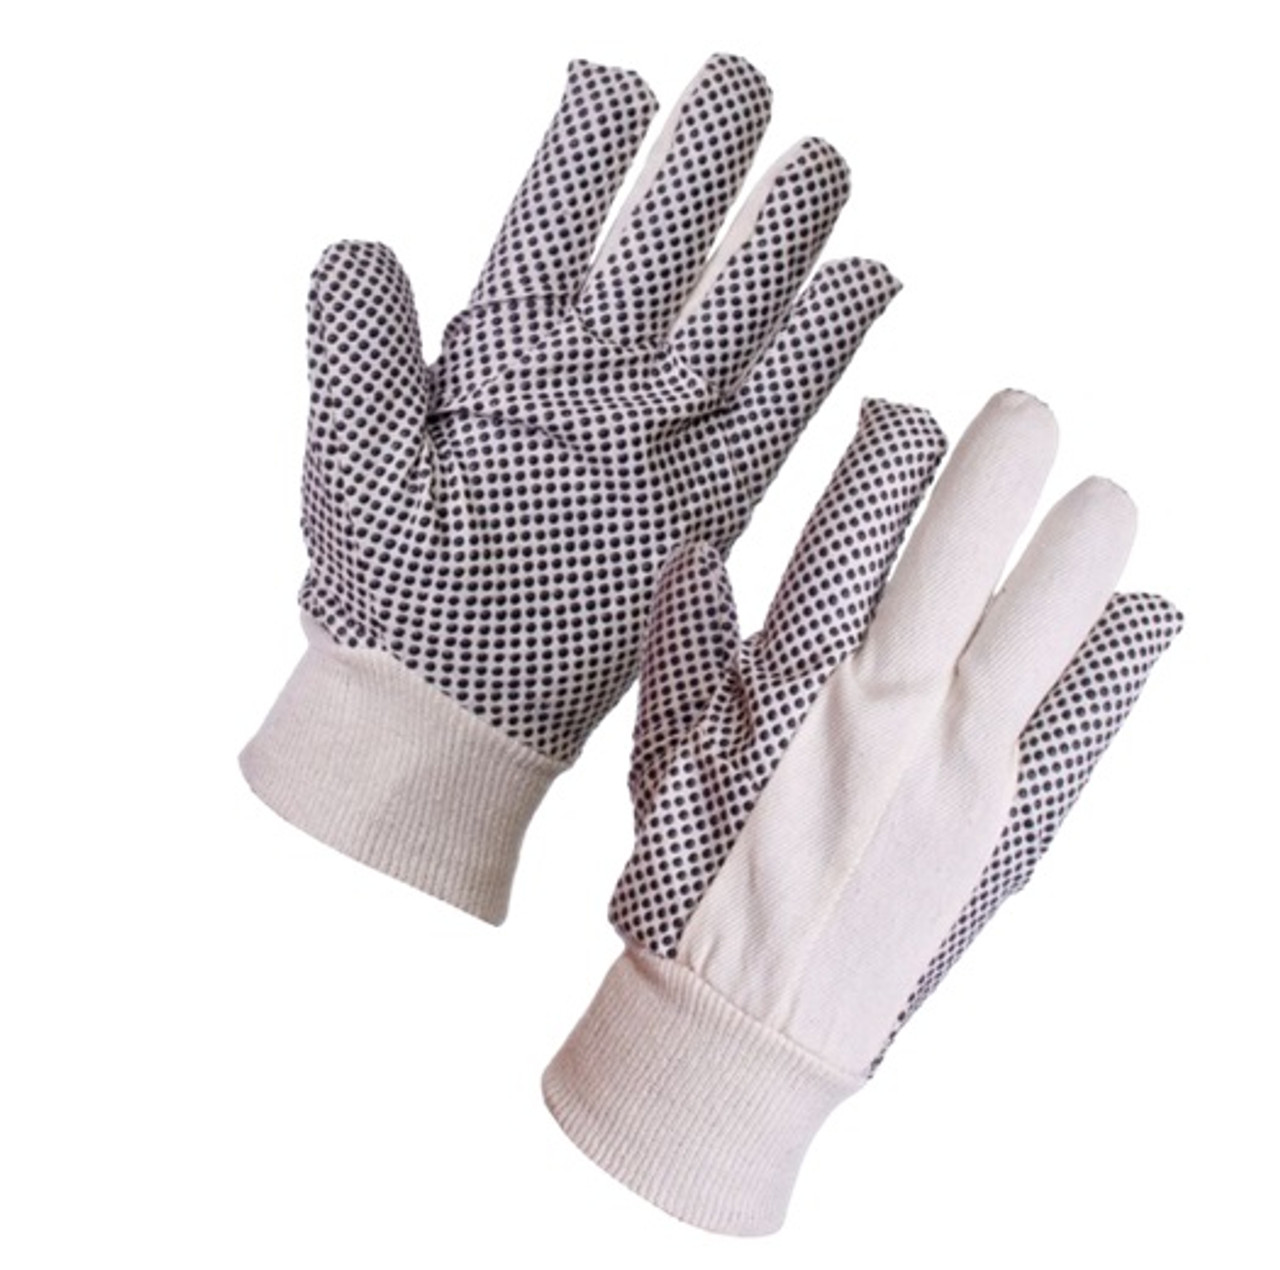 1 Pair - Supertouch  2620 Cotton Drill Polka Dot Gloves 